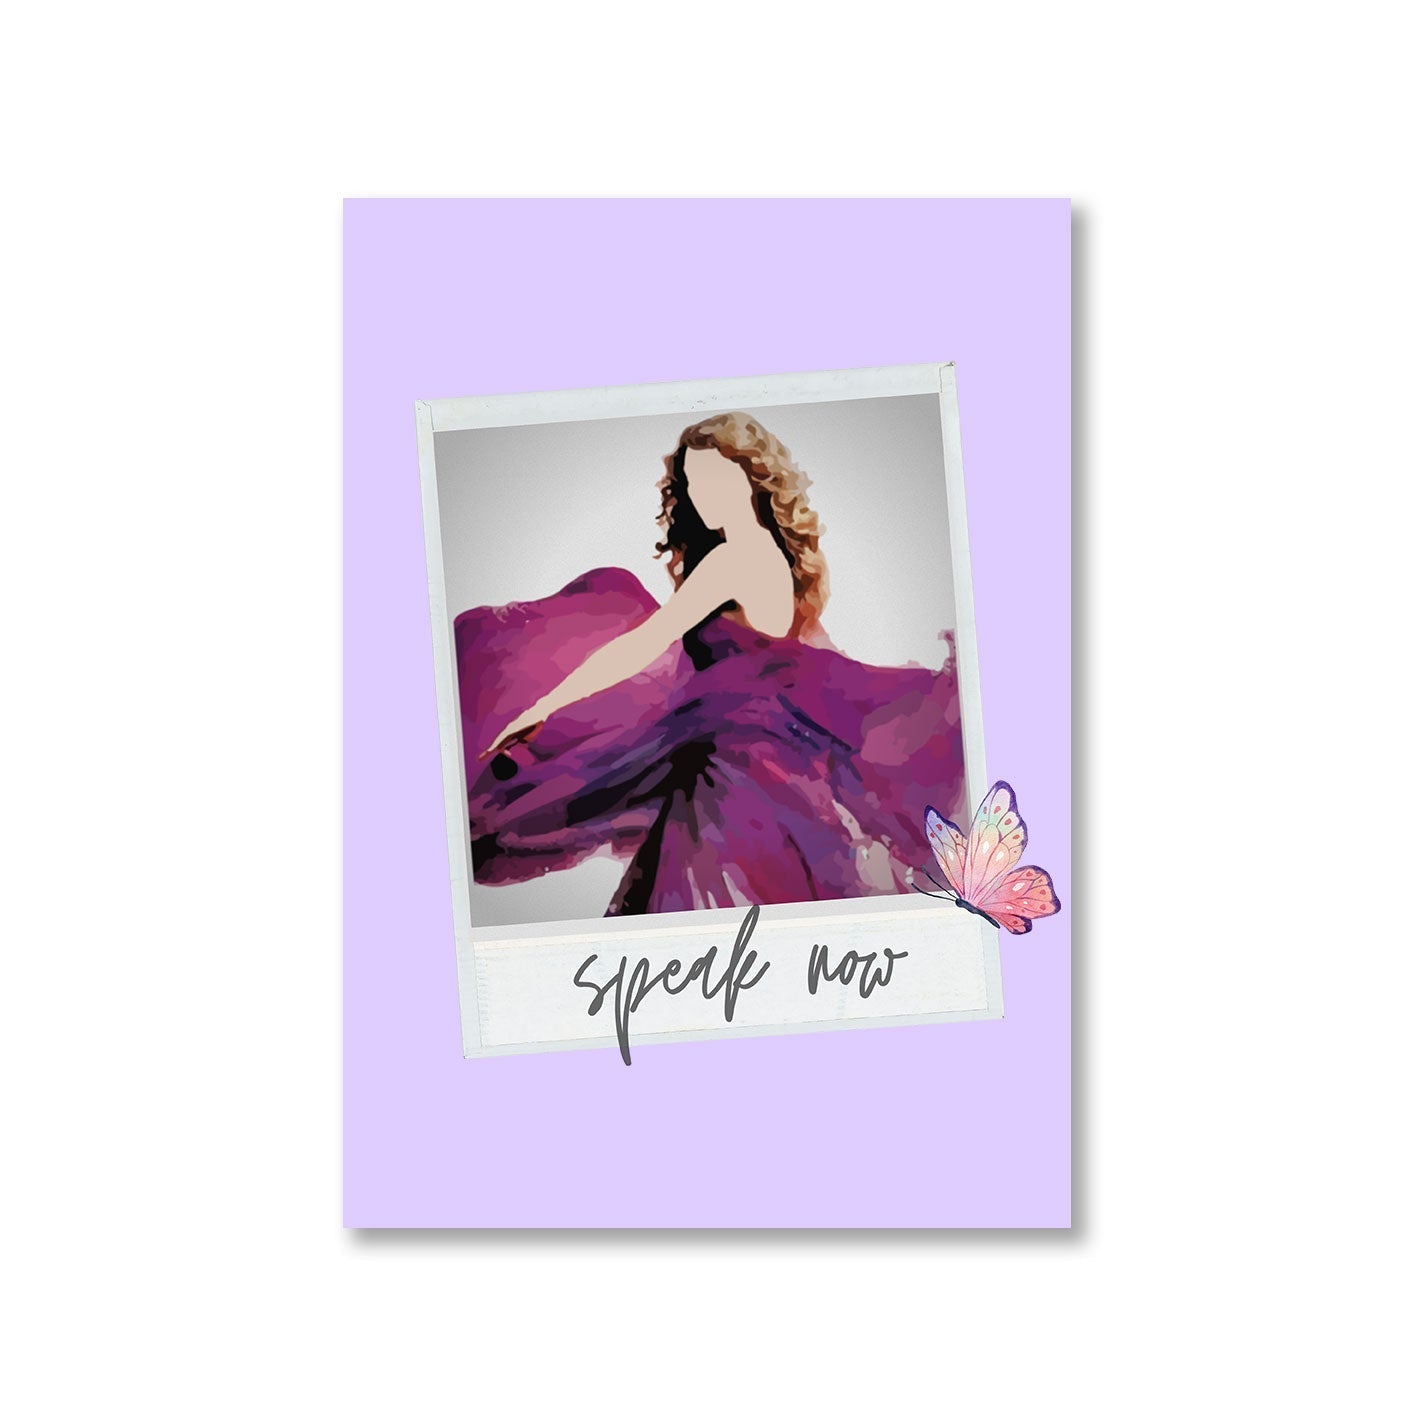 taylor swift speak now poster wall art buy online united states of america usa the banyan tee tbt a4